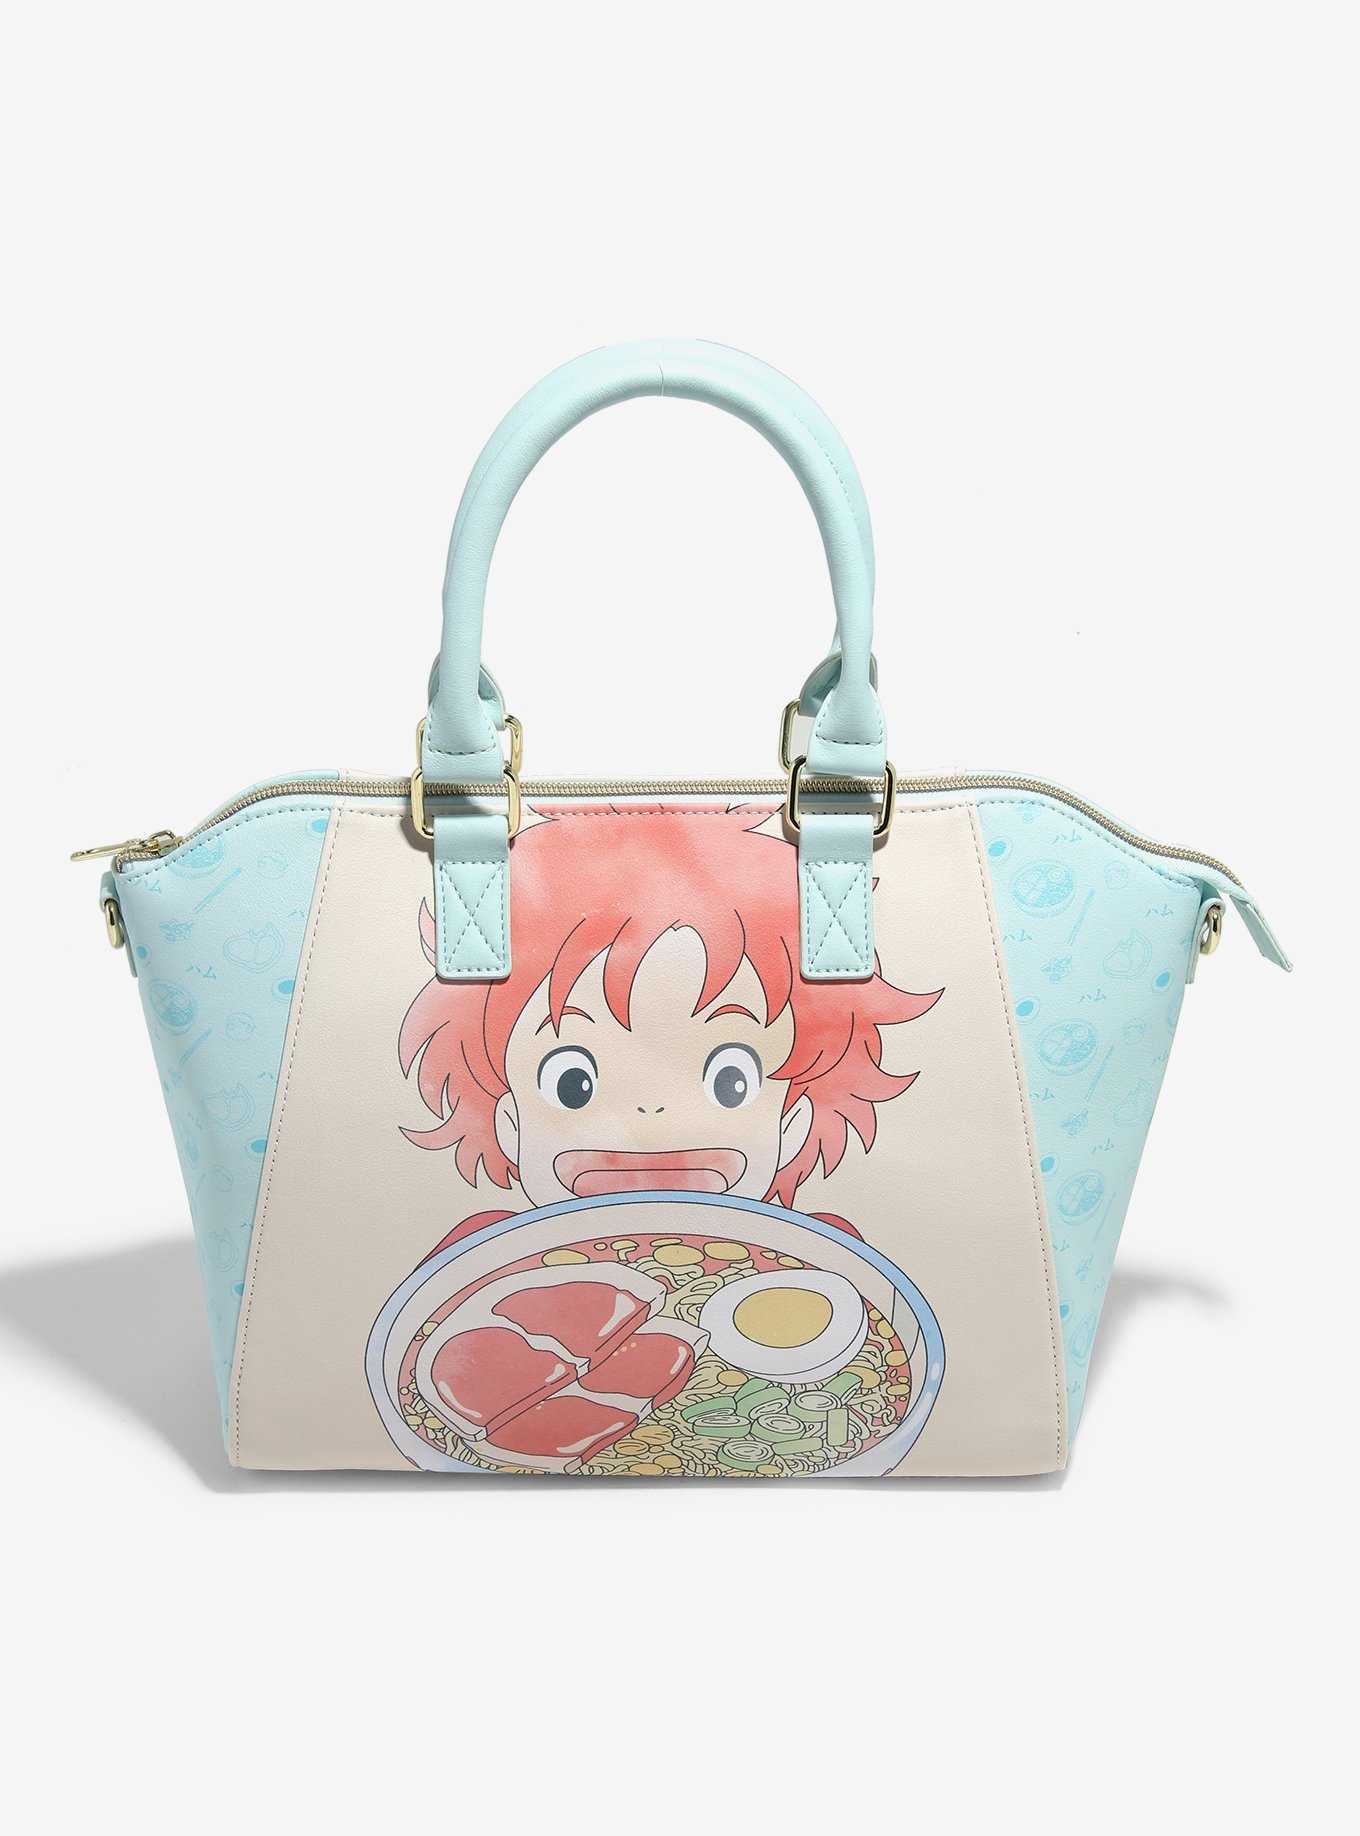 Studio Ghibli releases new bags and letter fans for anime fans